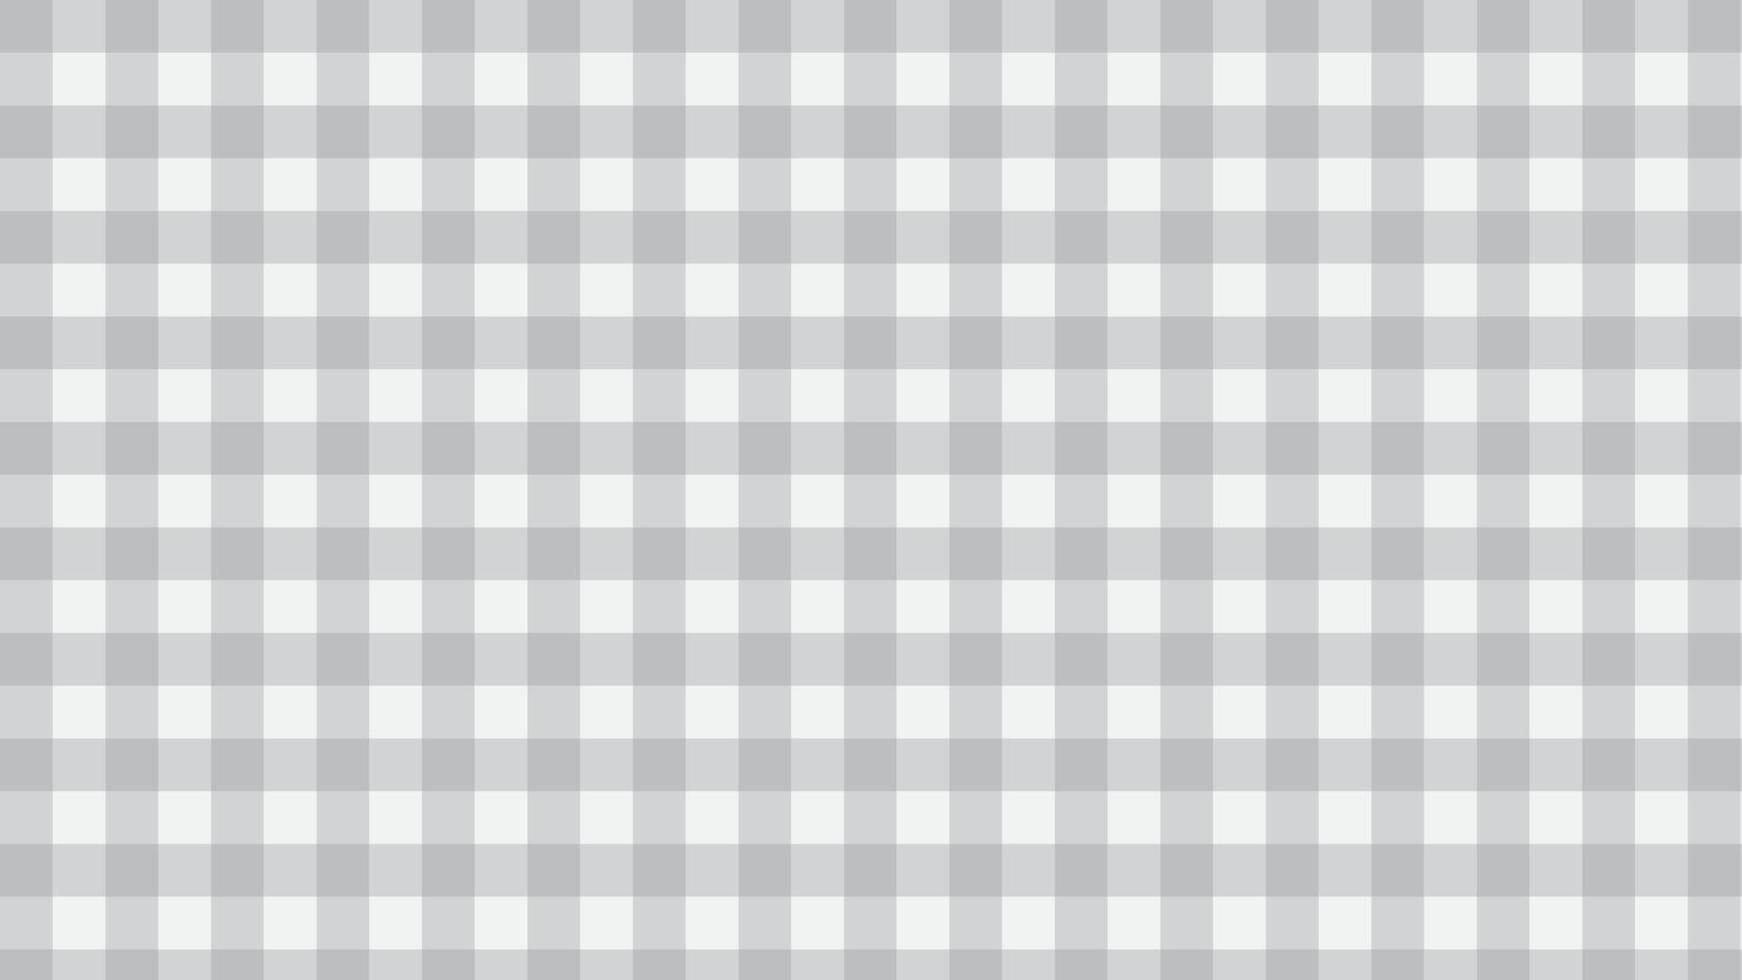 grey gingham, checkers, plaid, aesthetic checkerboard pattern wallpaper illustration, perfect for wallpaper, backdrop, postcard, background for your design vector